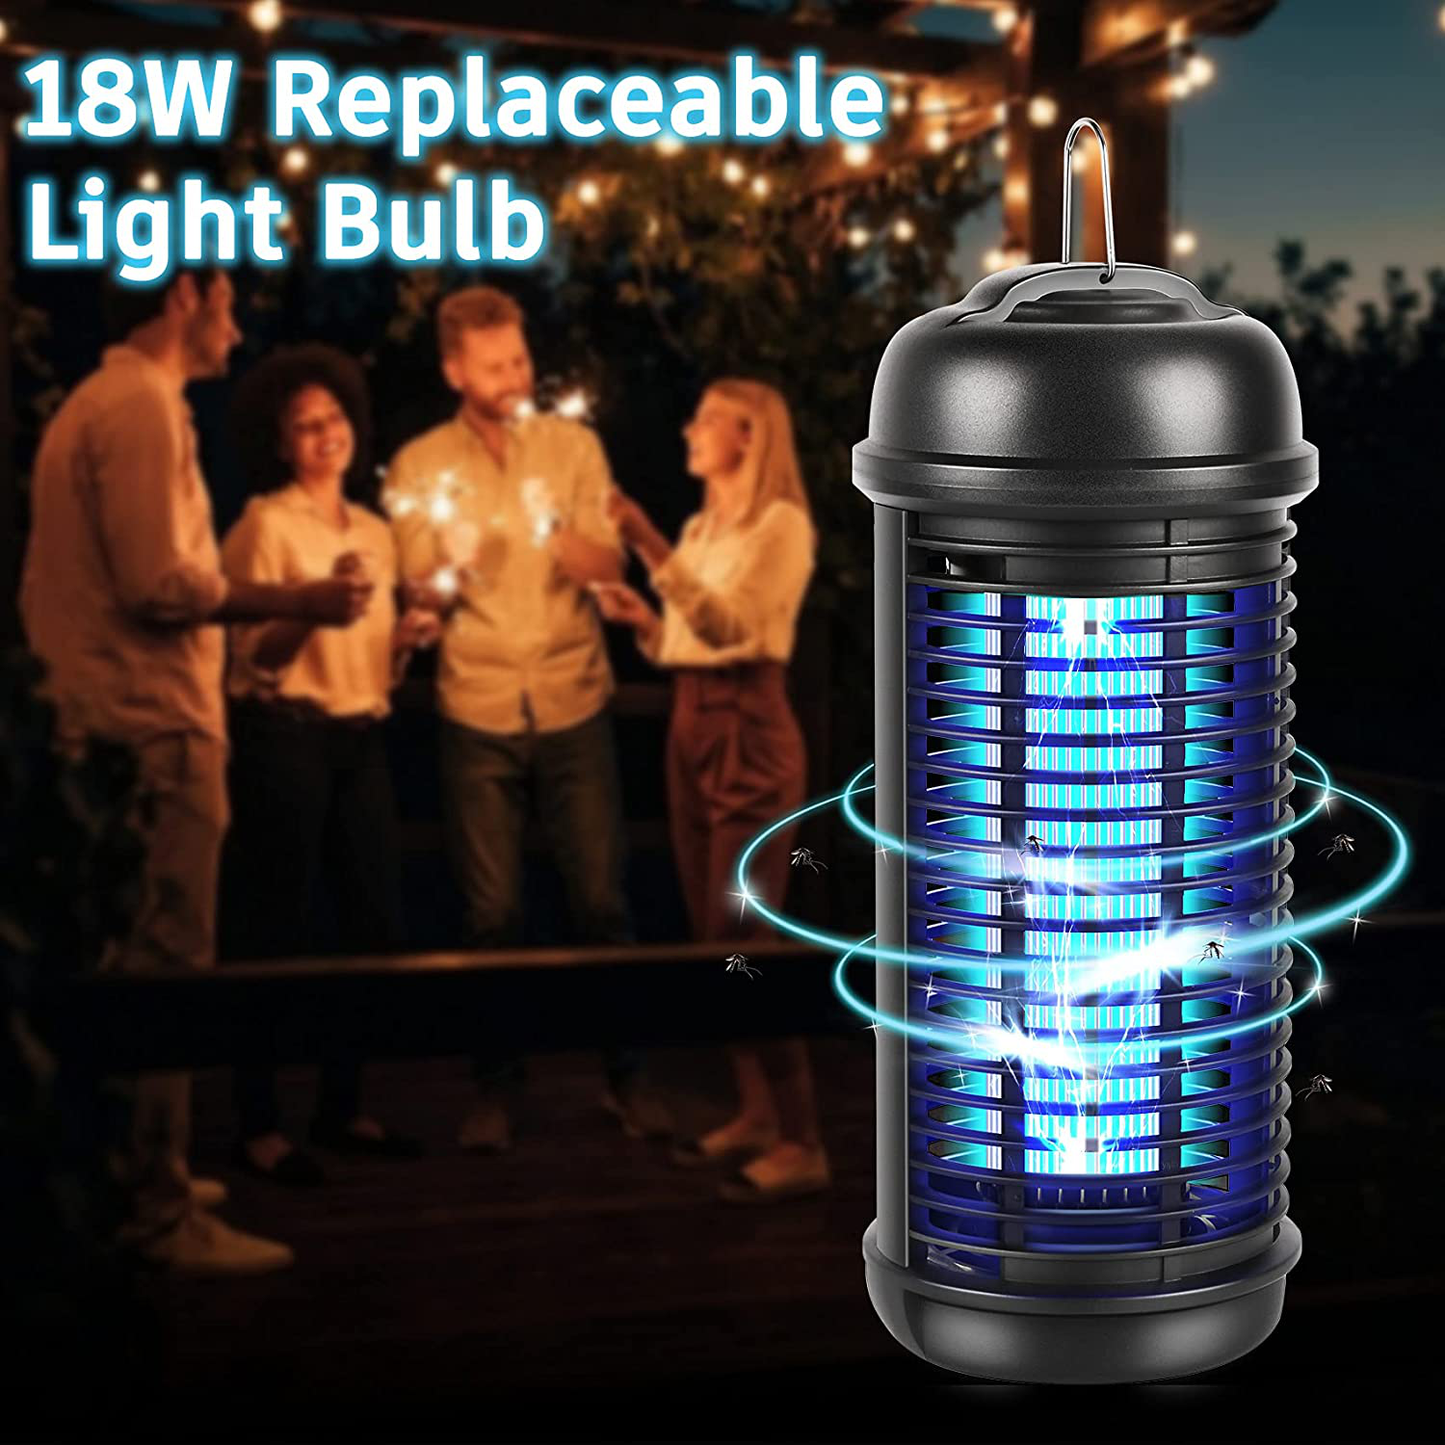 18W Electric Mosquito Bug Zapper Light Bulb, 4250V Outdoor Insect Killer, Plugged in Pest Killer for Backyard, Patio, Porch and Deck, Waterproof Ultraviolet Mosquito Attractant.